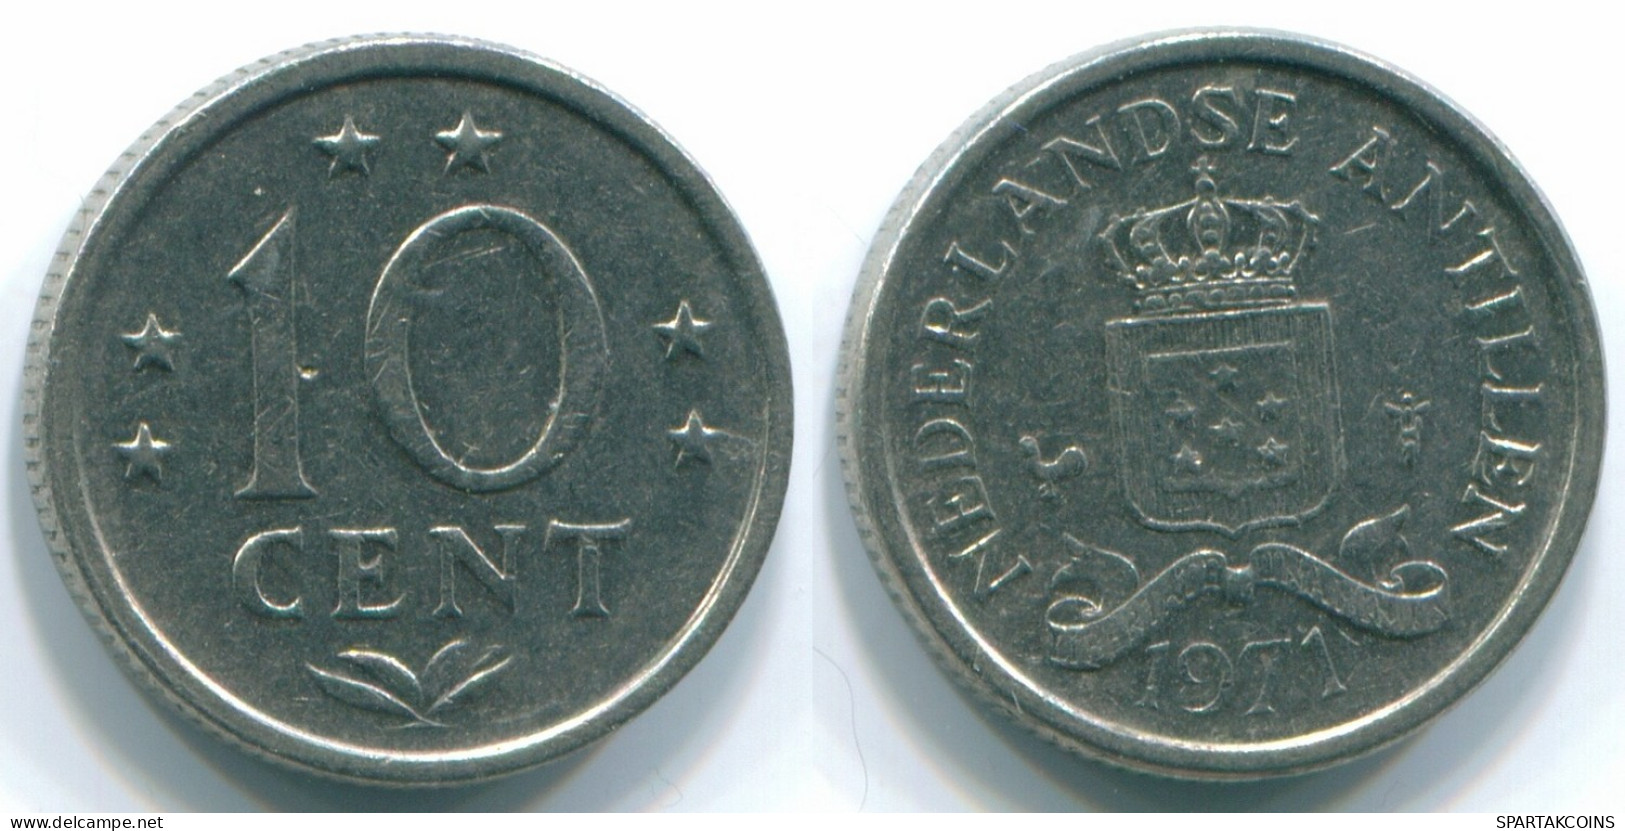 10 CENTS 1971 NETHERLANDS ANTILLES Nickel Colonial Coin #S13448.U.A - Antille Olandesi